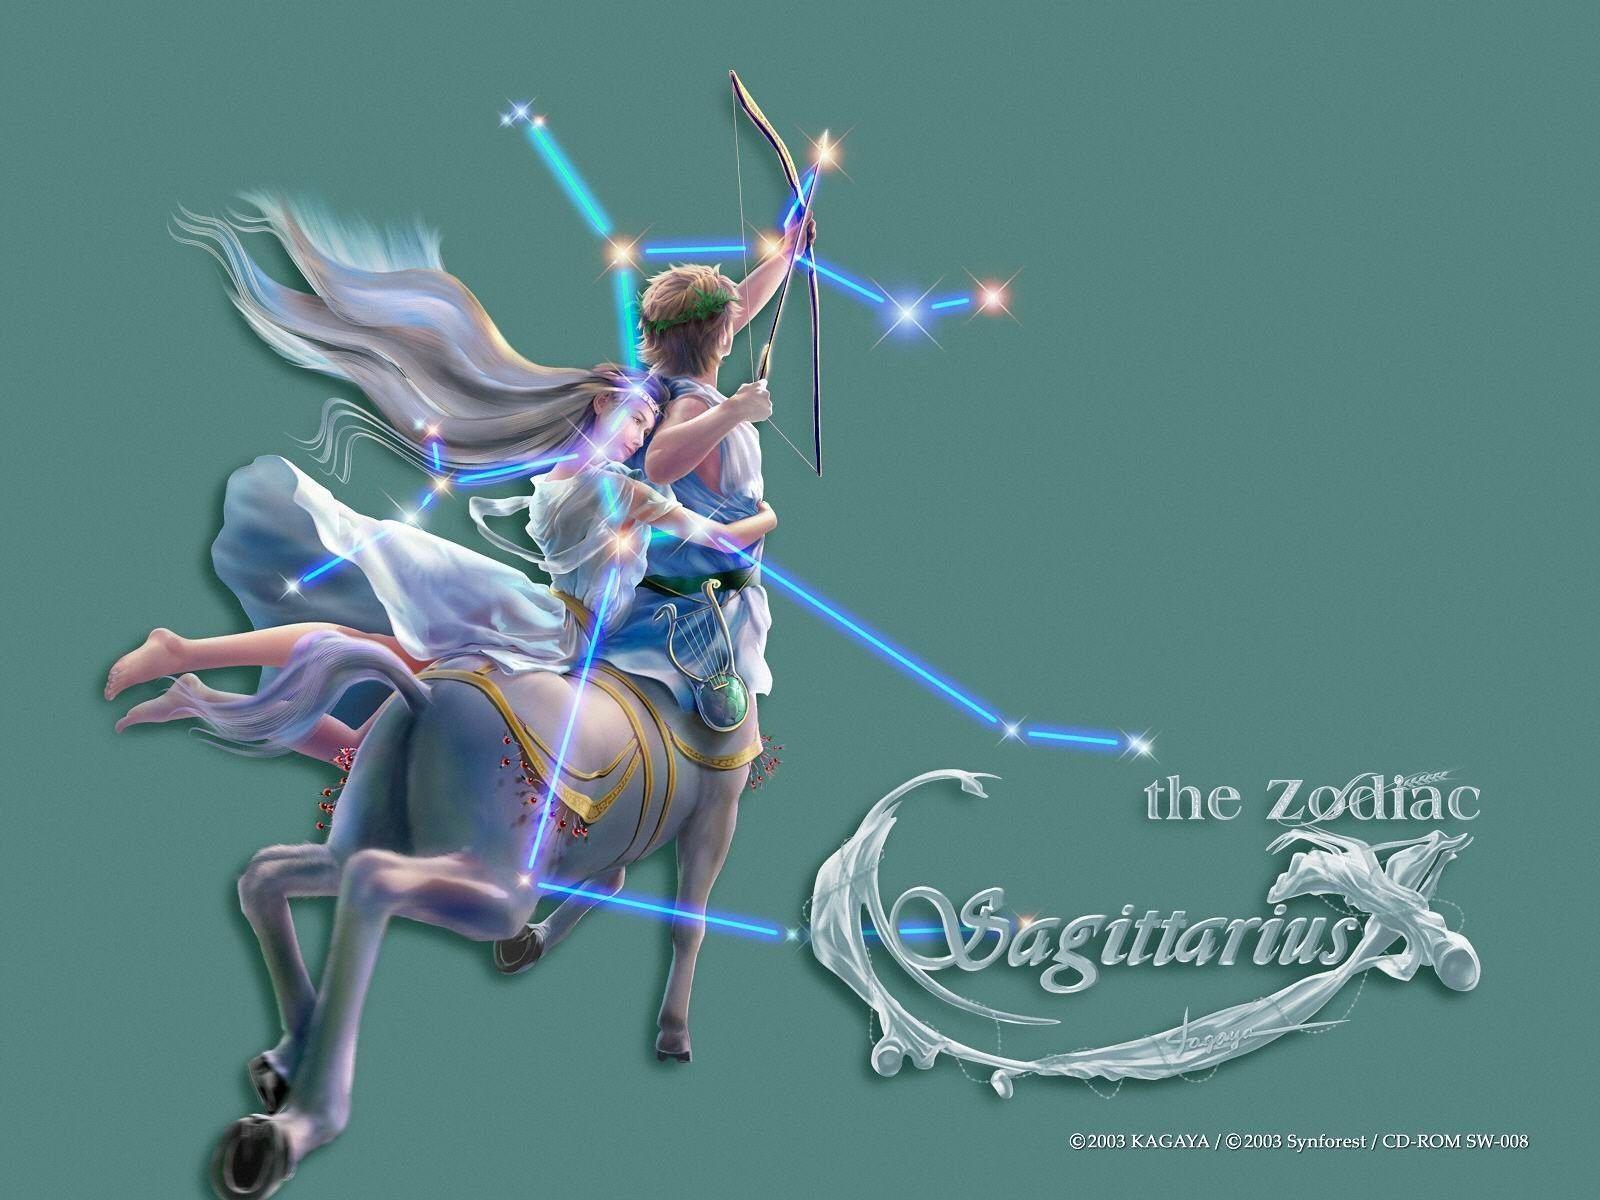 Sign of the zodiac Sagittarius wallpaper and image